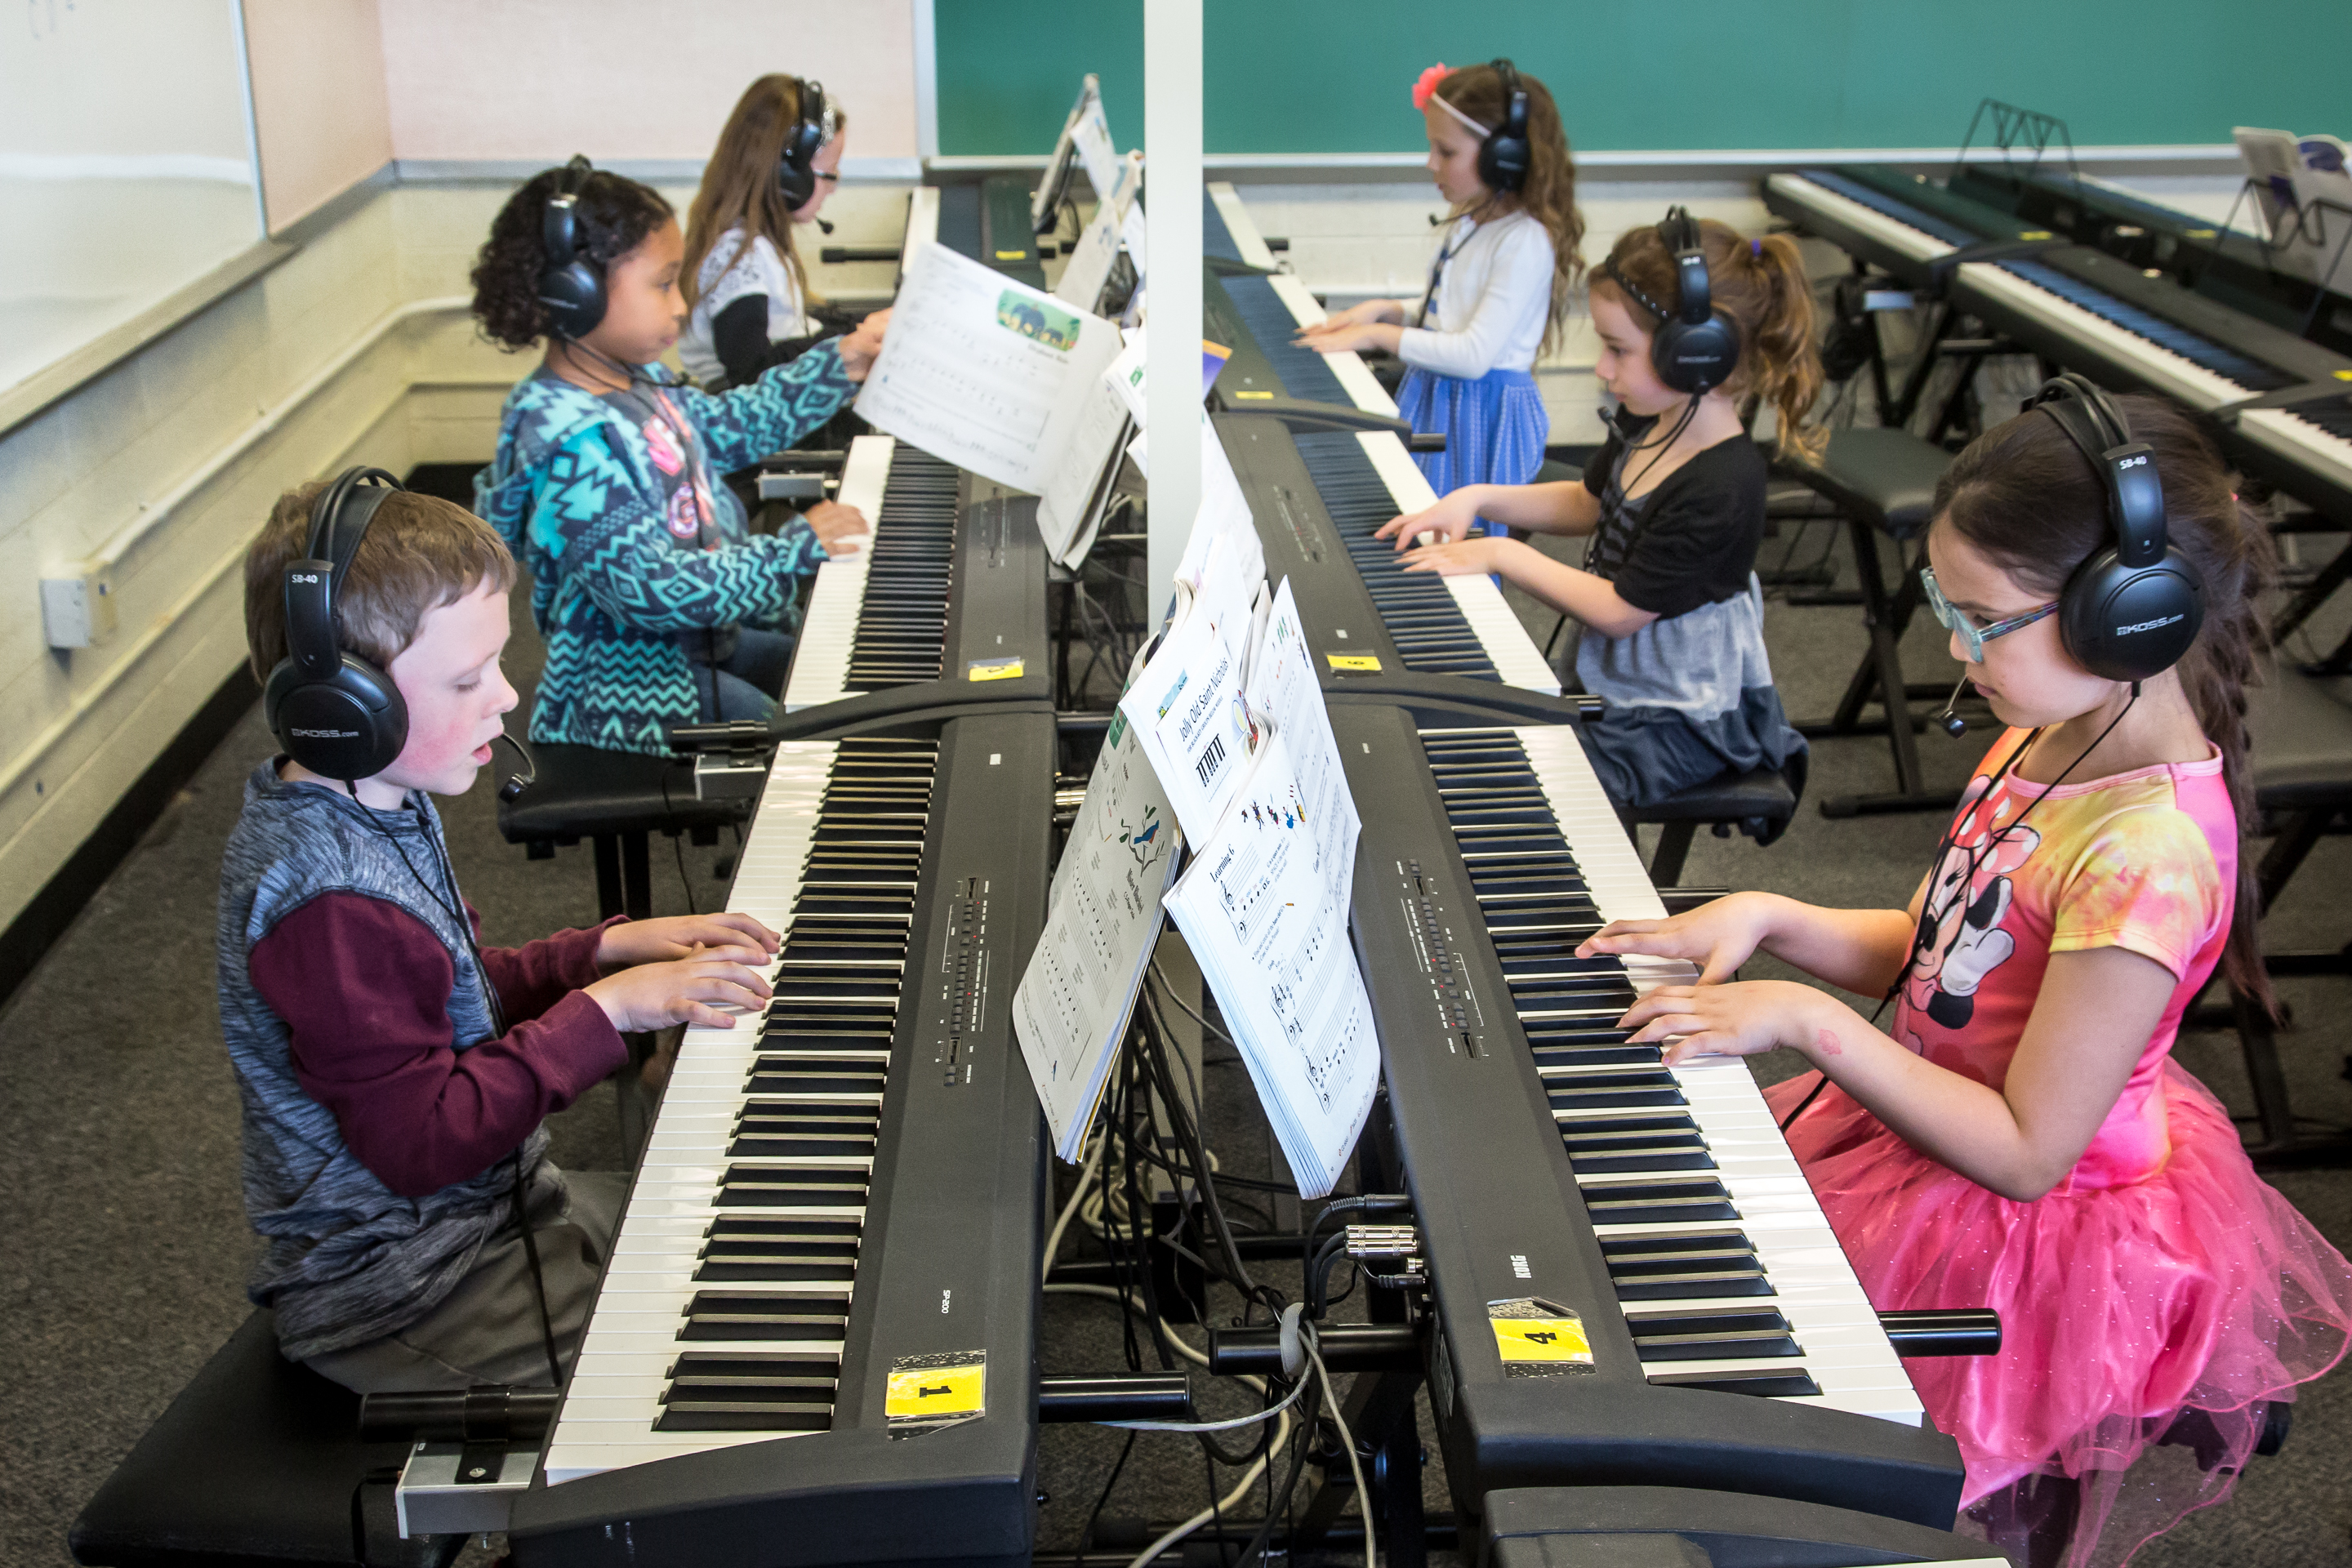 Piano Teachers Guide to dealing with technical problems